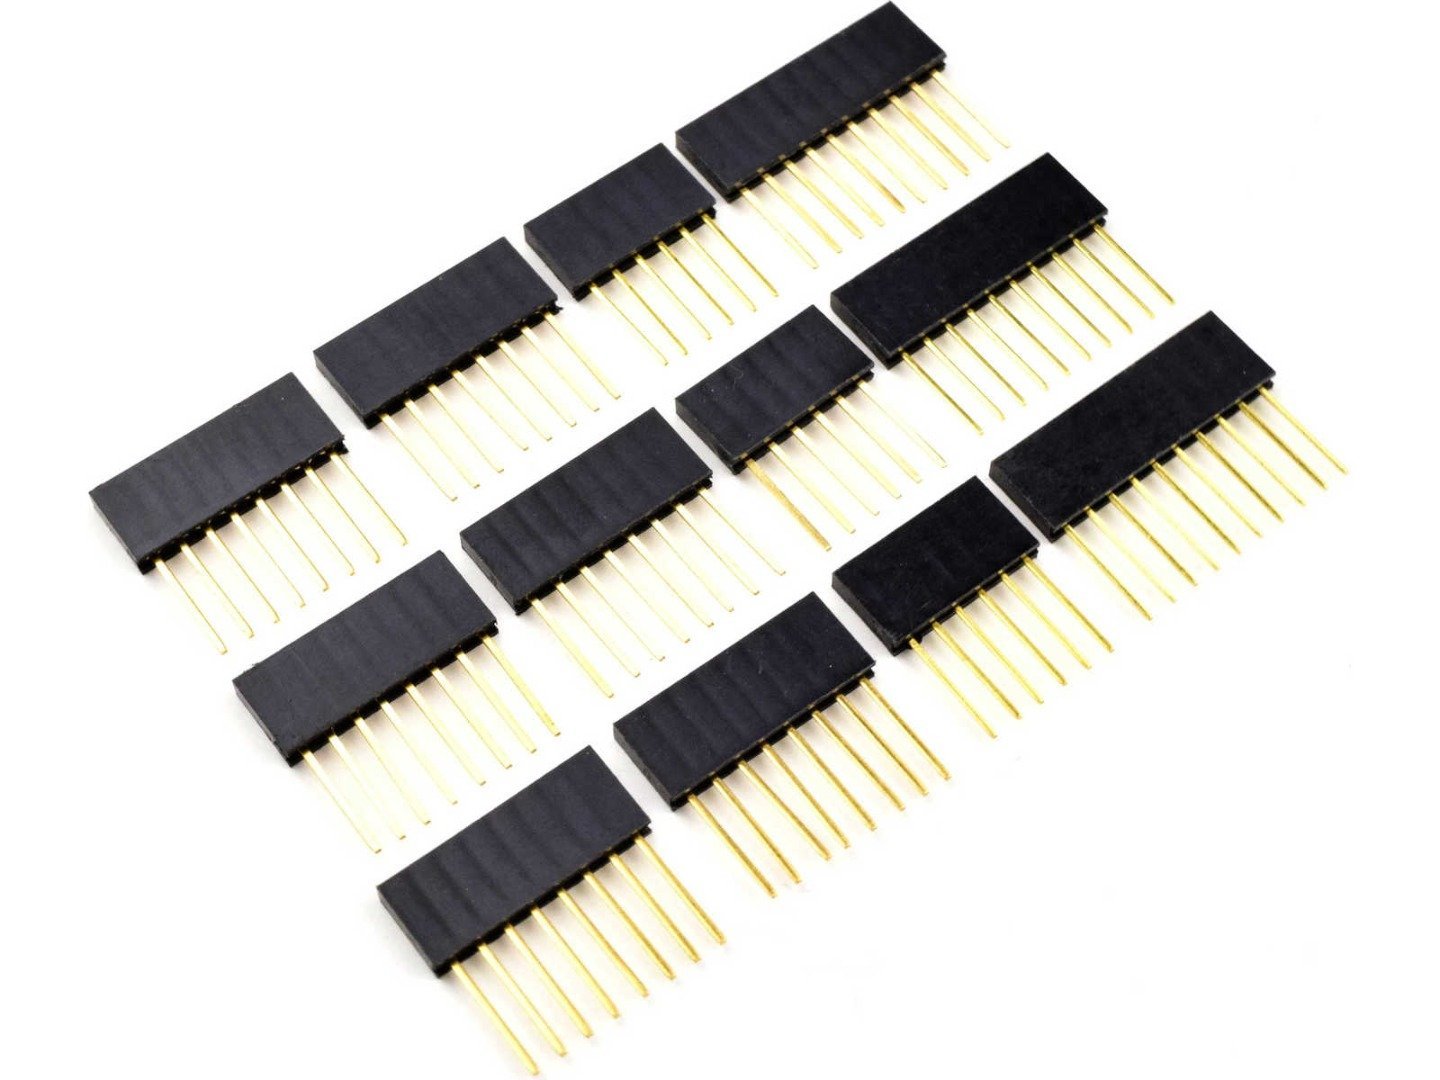 12 pcs Stackable Shield Headers with long leads 11 mm for Arduino prototyping 4